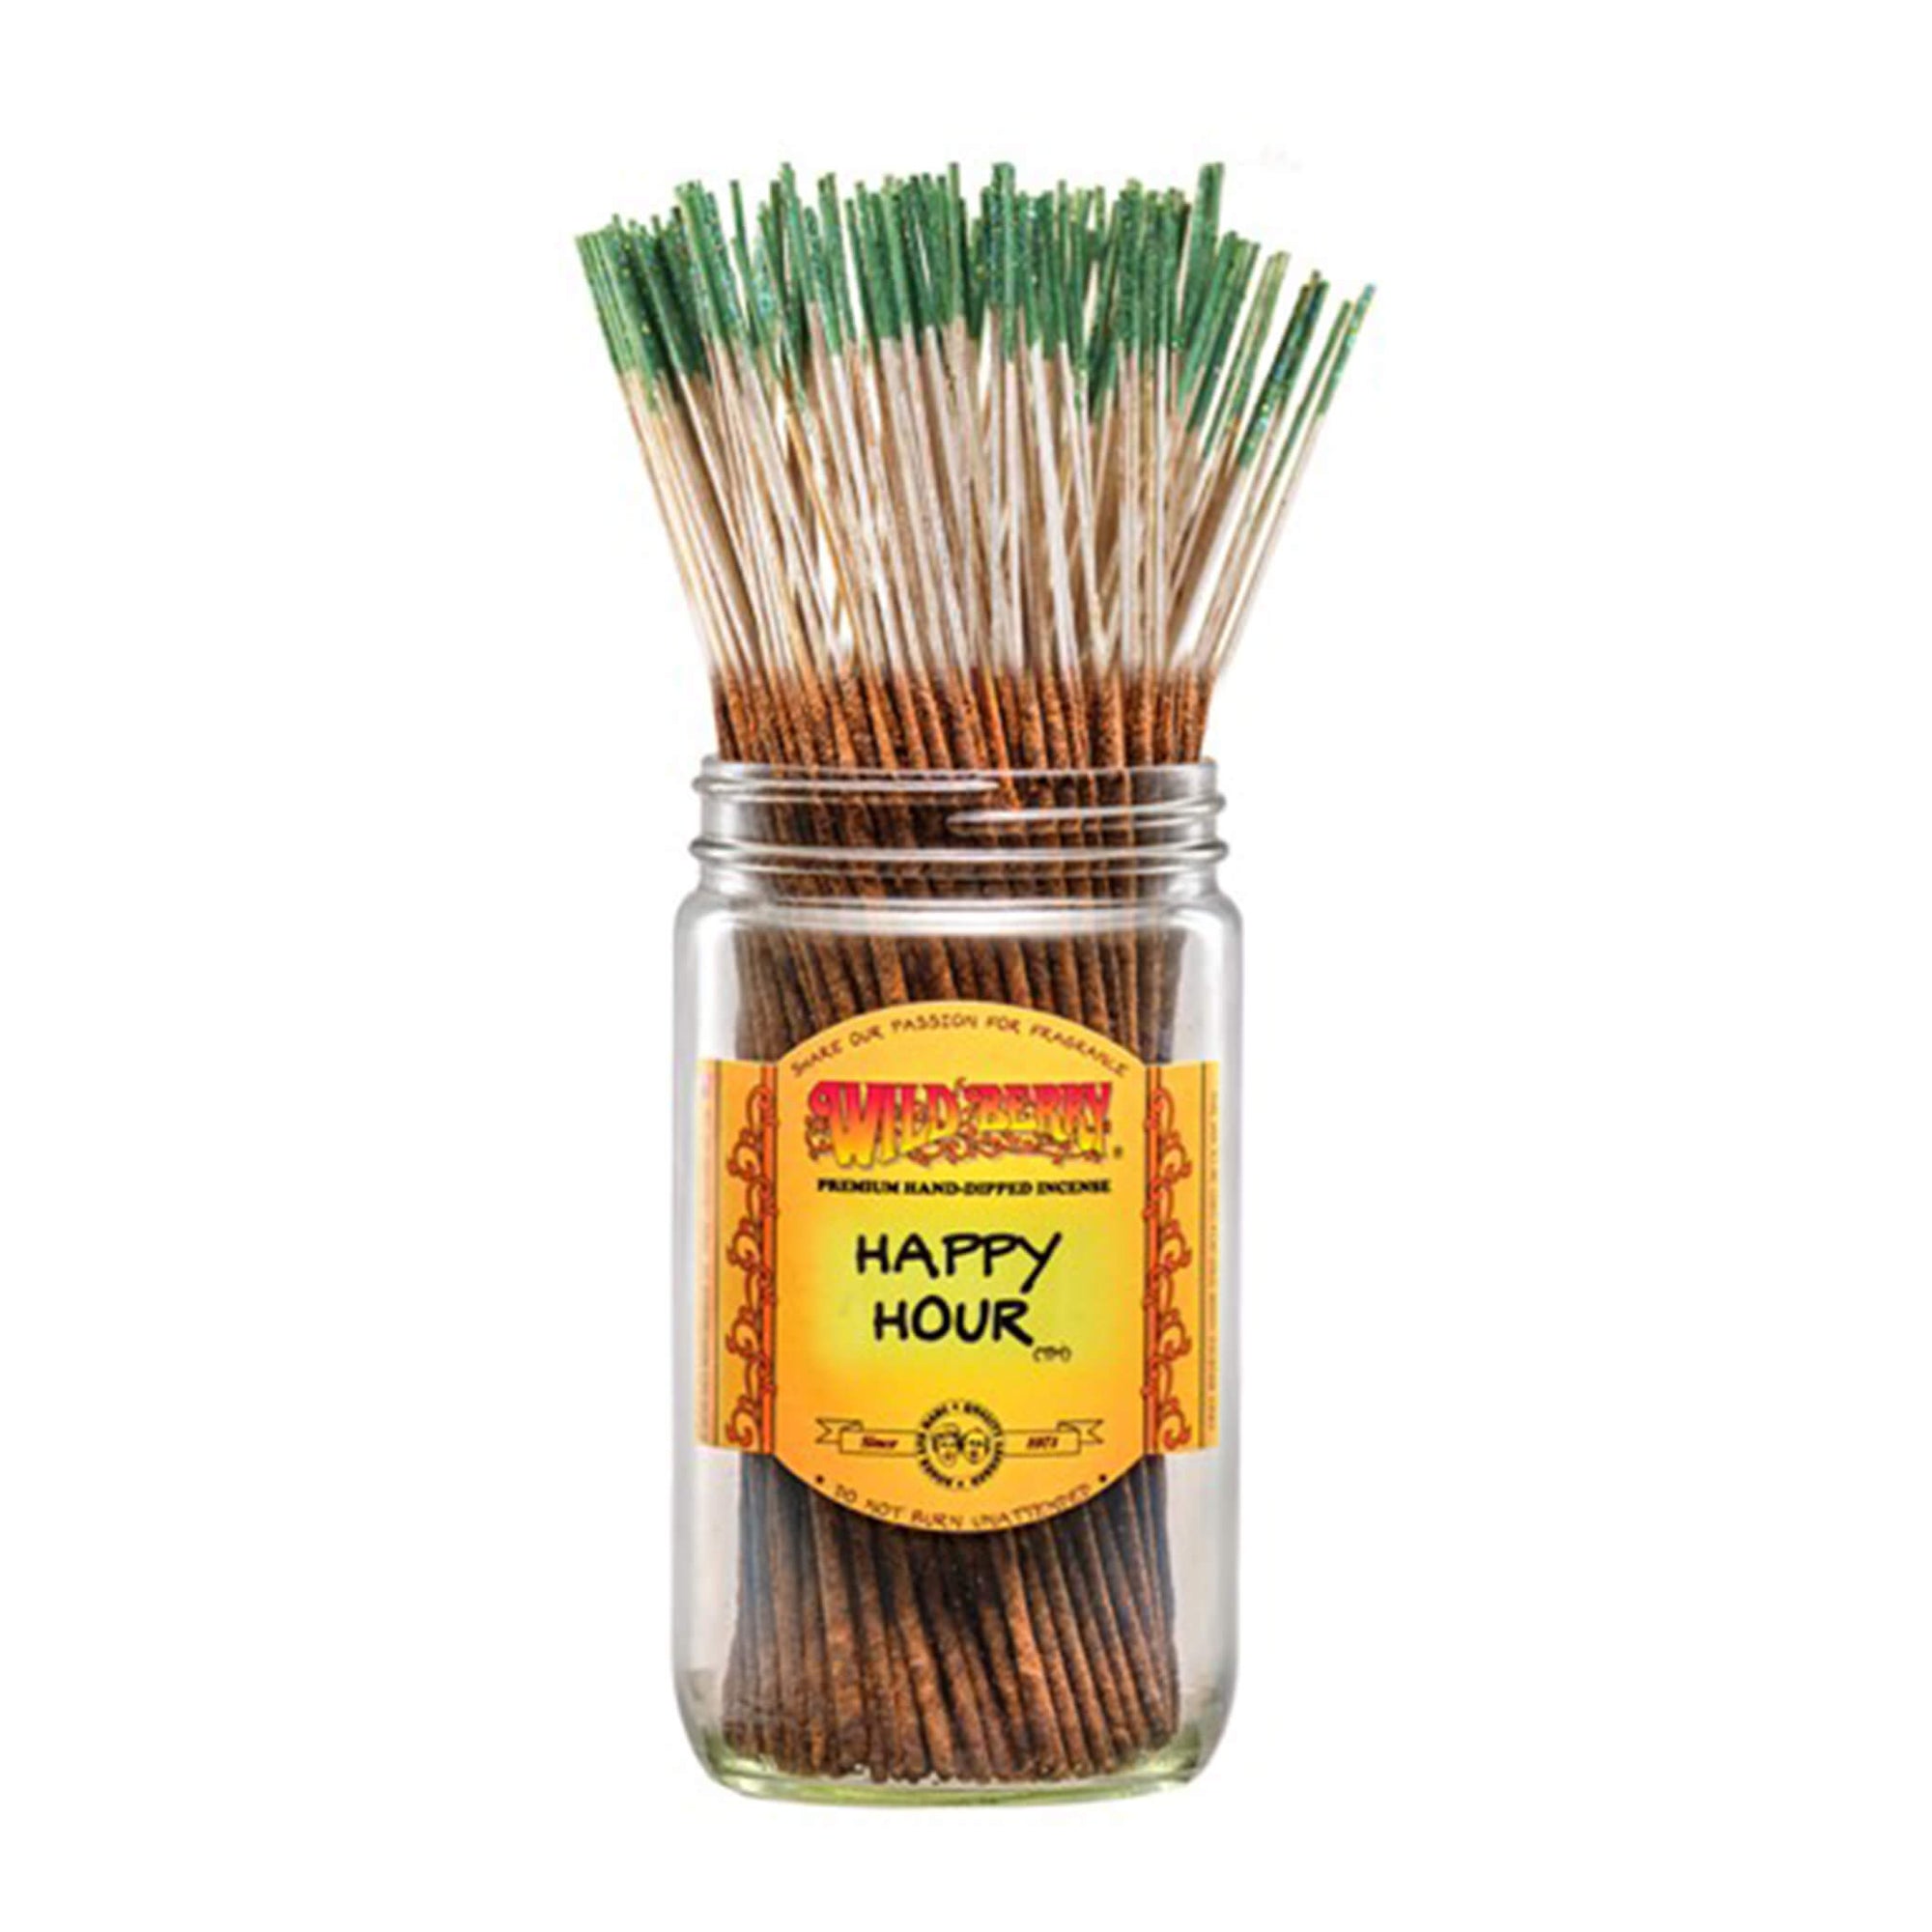 Happy Hour™ Incense Sticks | Profile View In Jar | the dabbing specialists